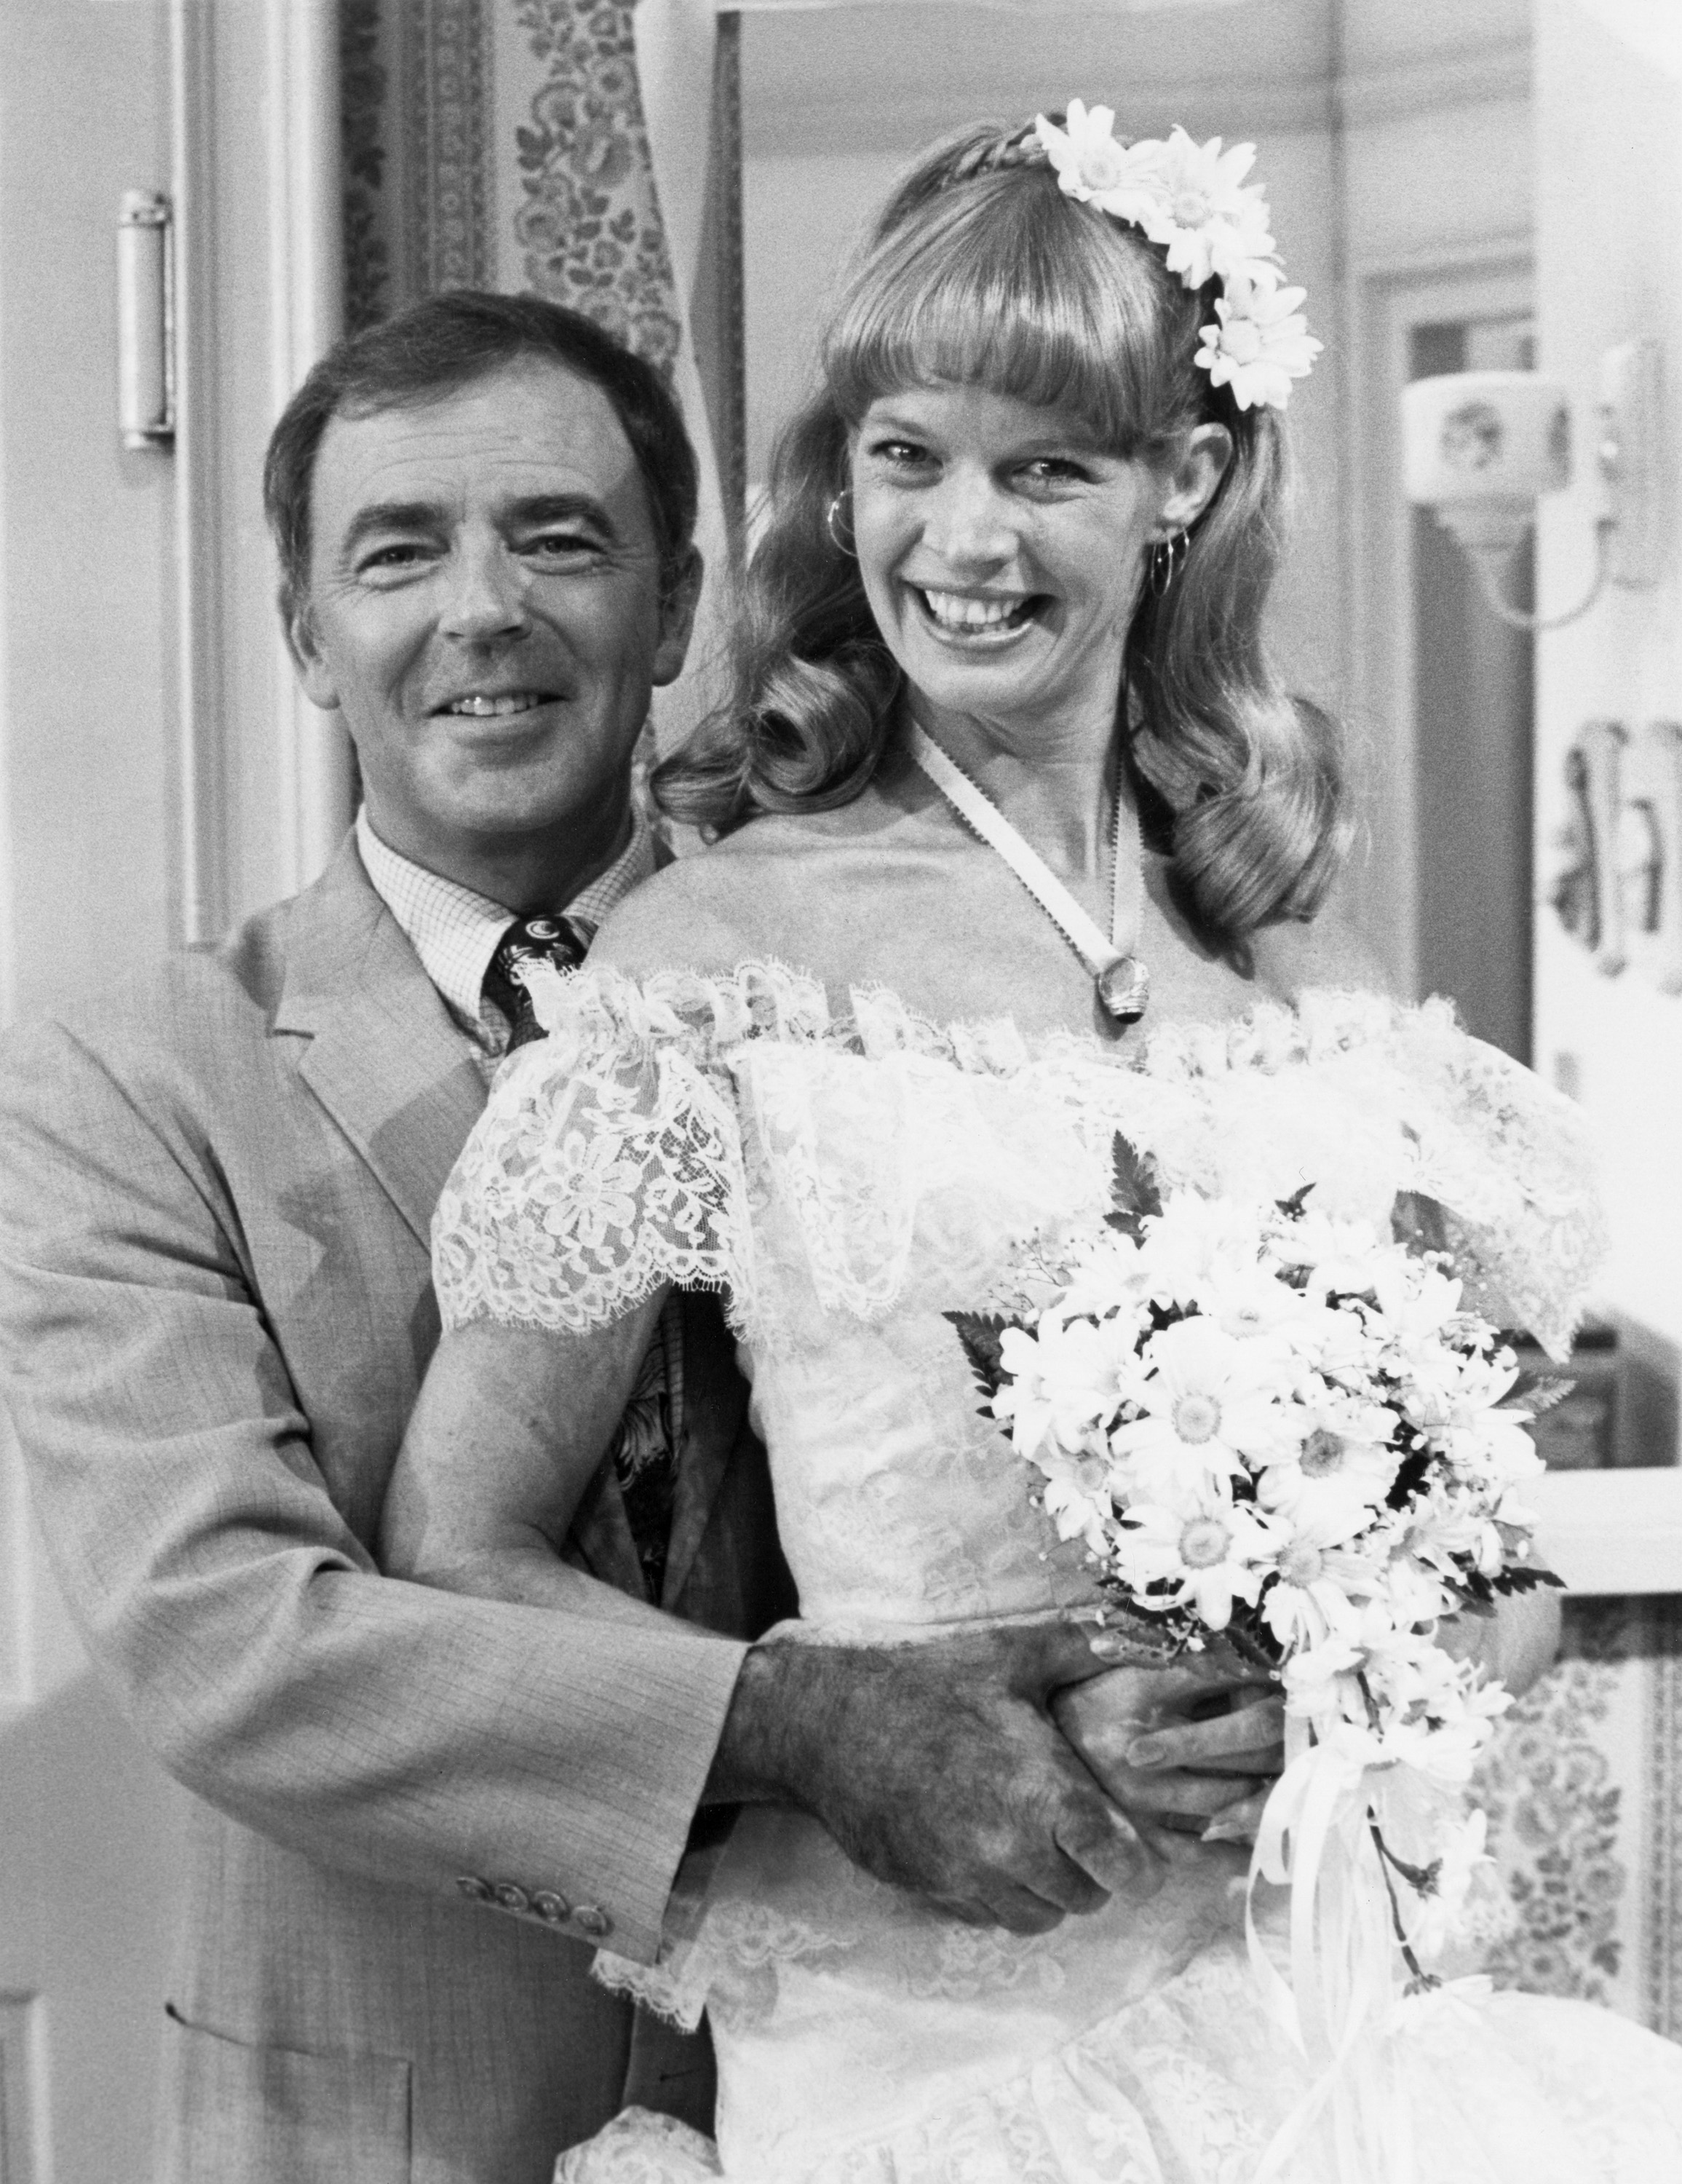 Ken Berry as Vinton Harper and Dorothy Lyman as Naomi Oates Harper on "Mama's Family" on August 10, 1982 | Source: Getty Images